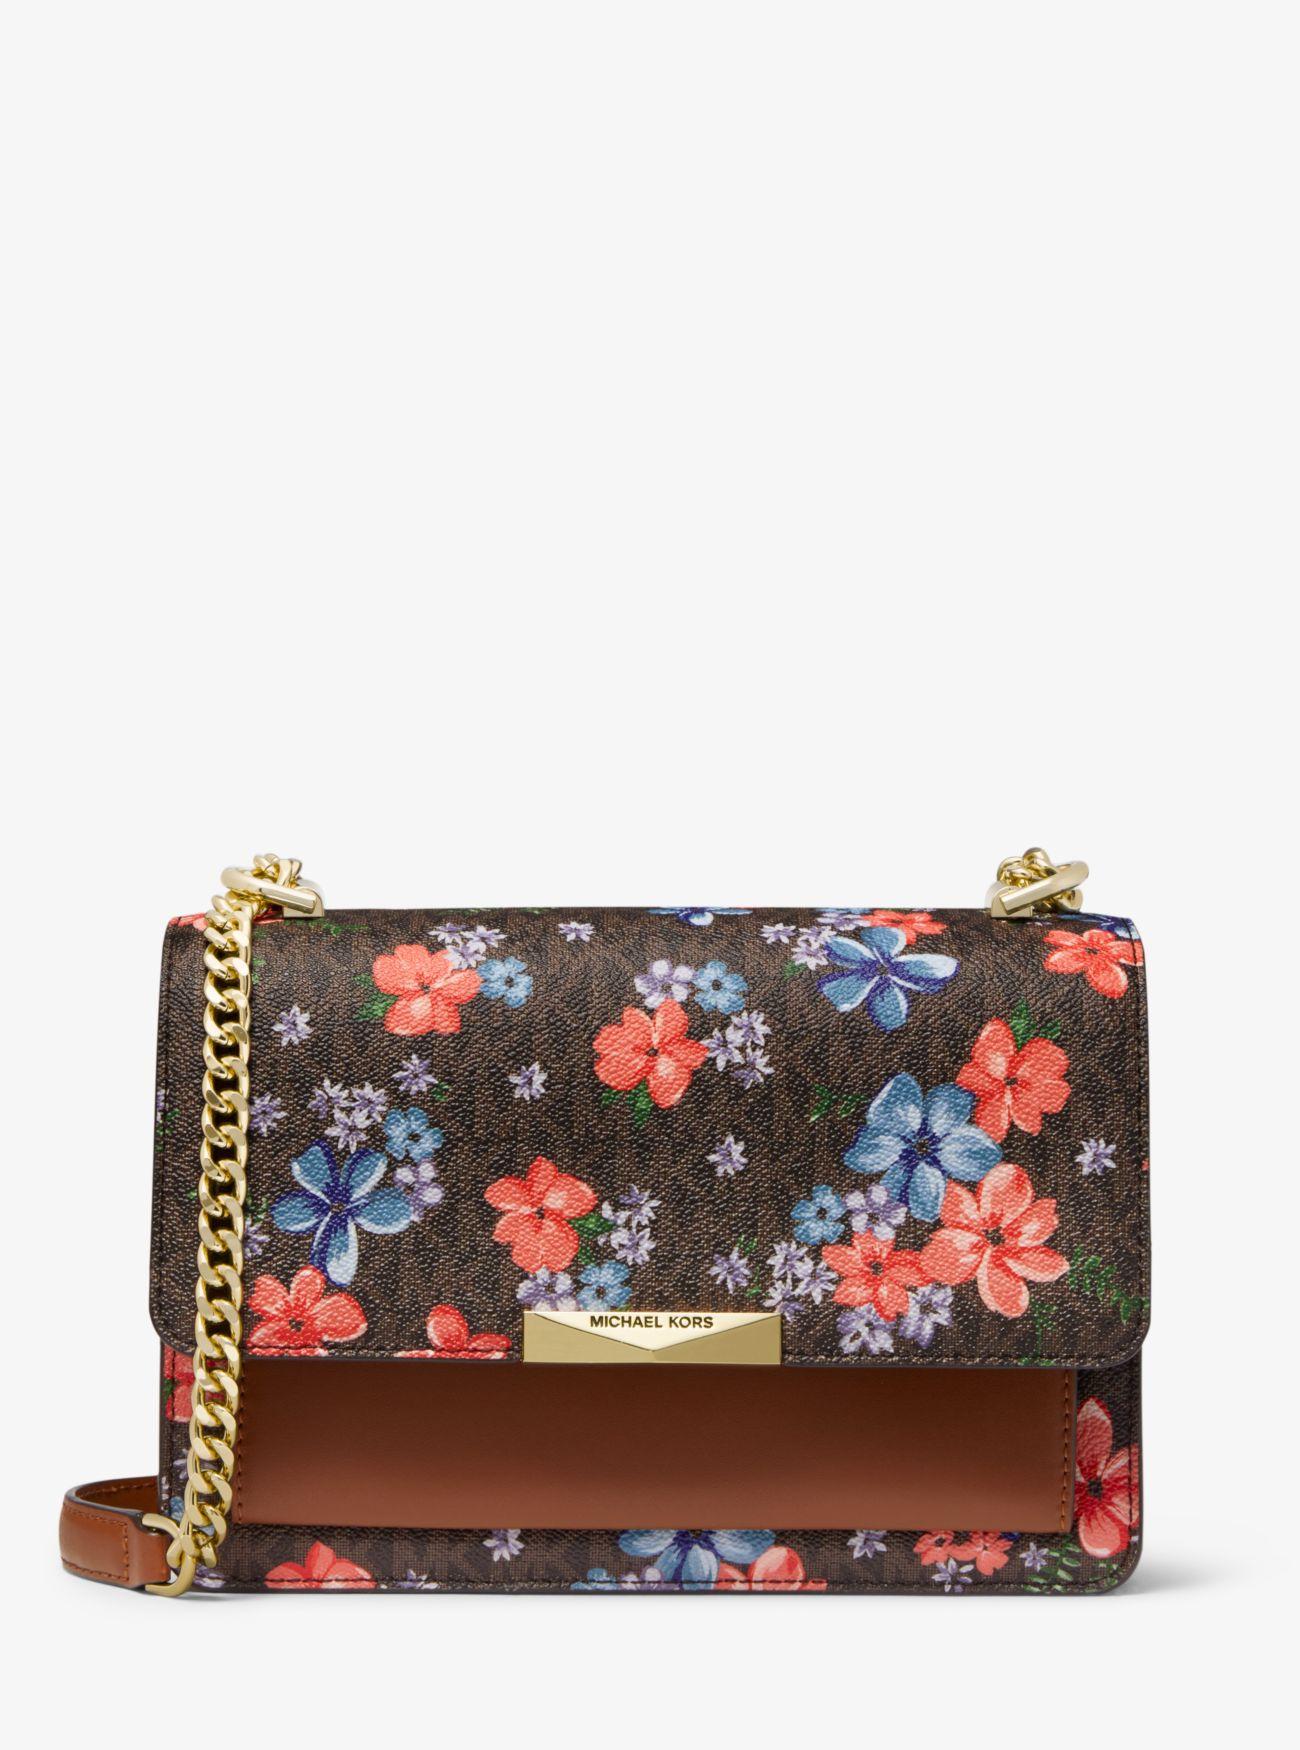 Michael Kors Jade Large Floral-printed Logo And Leather Crossbody Bag in Brown - Lyst